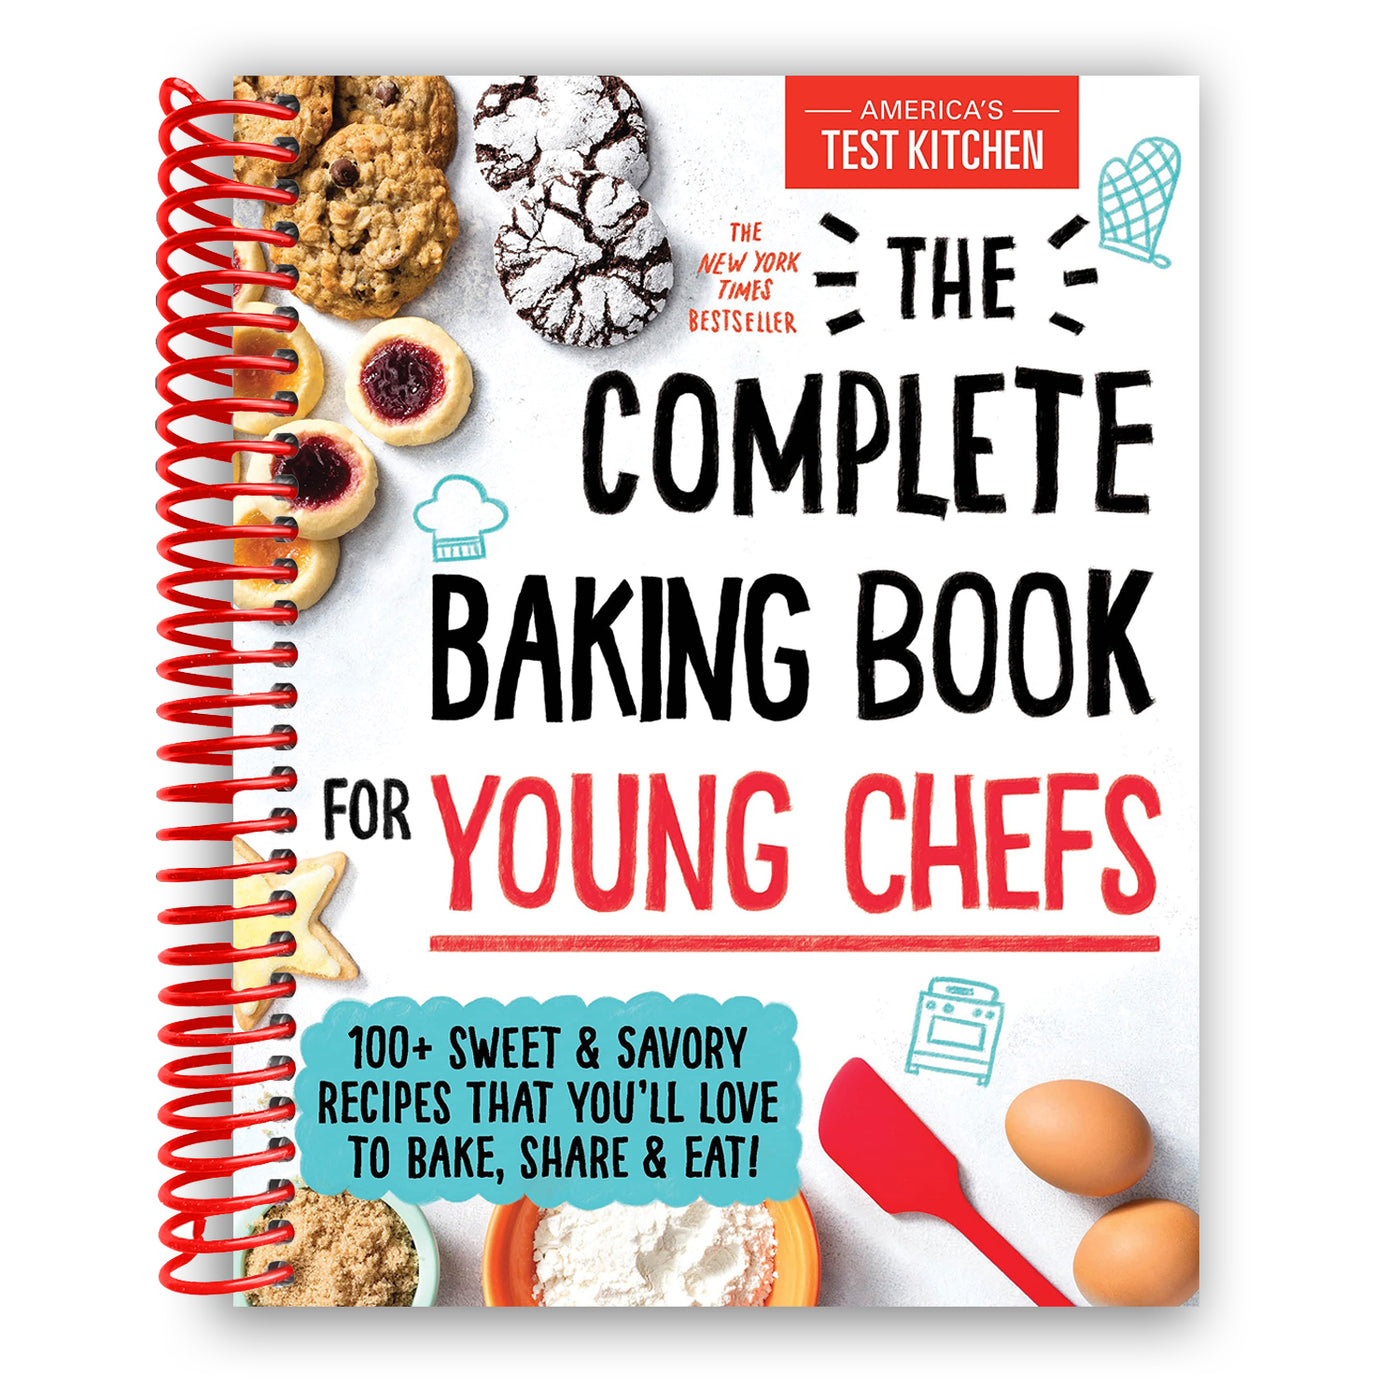 The Complete Baking Book for Young Chefs (Spiral Bound)